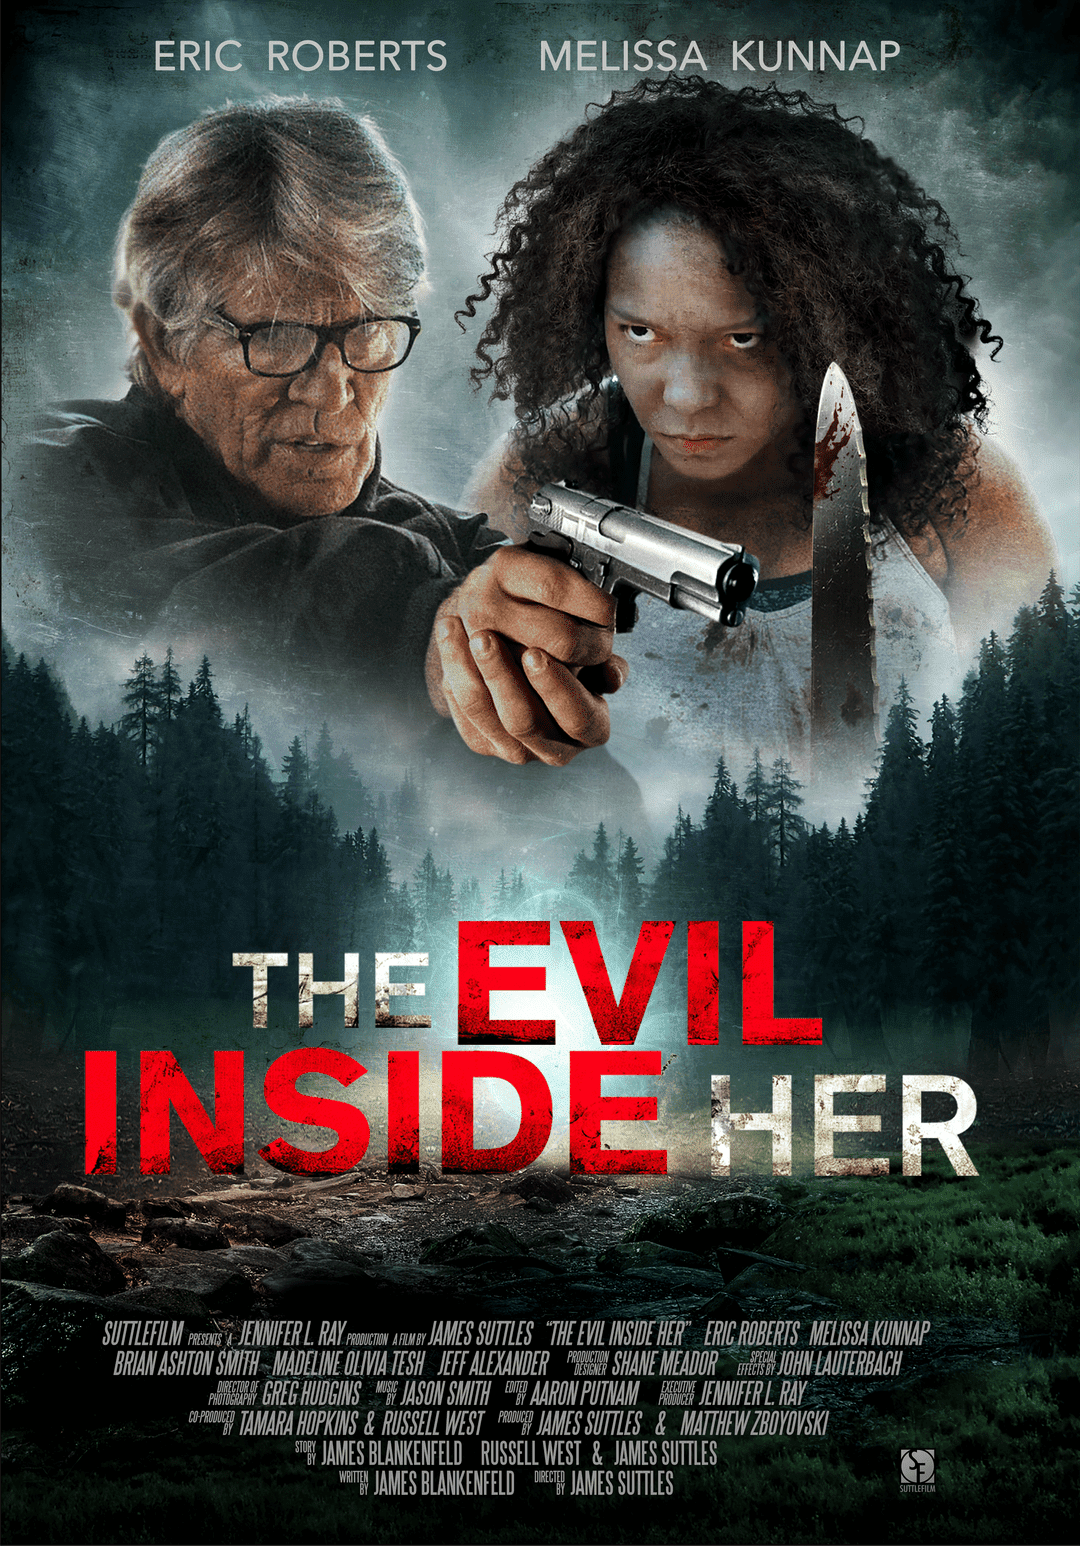 The Evil Inside Her Puts a Knife in a Psychotic's Hand this June 13th ~ 28DLA